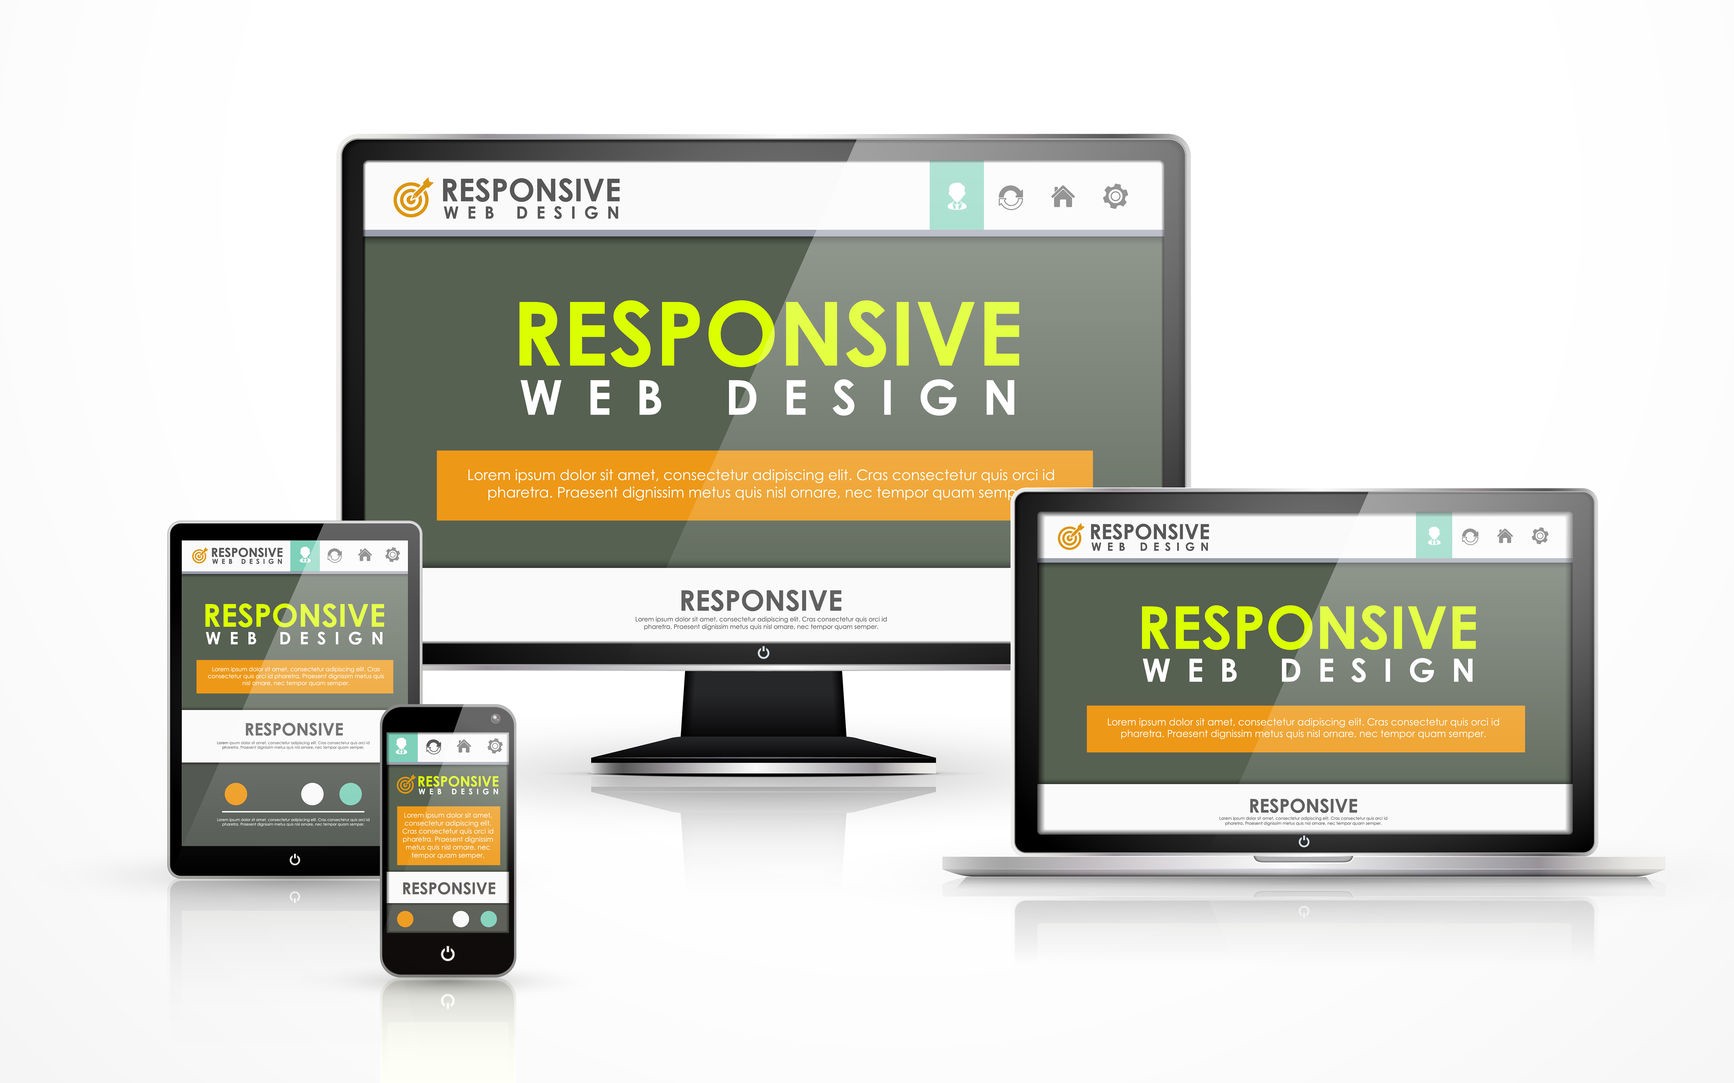 What Is A Responsive Website?